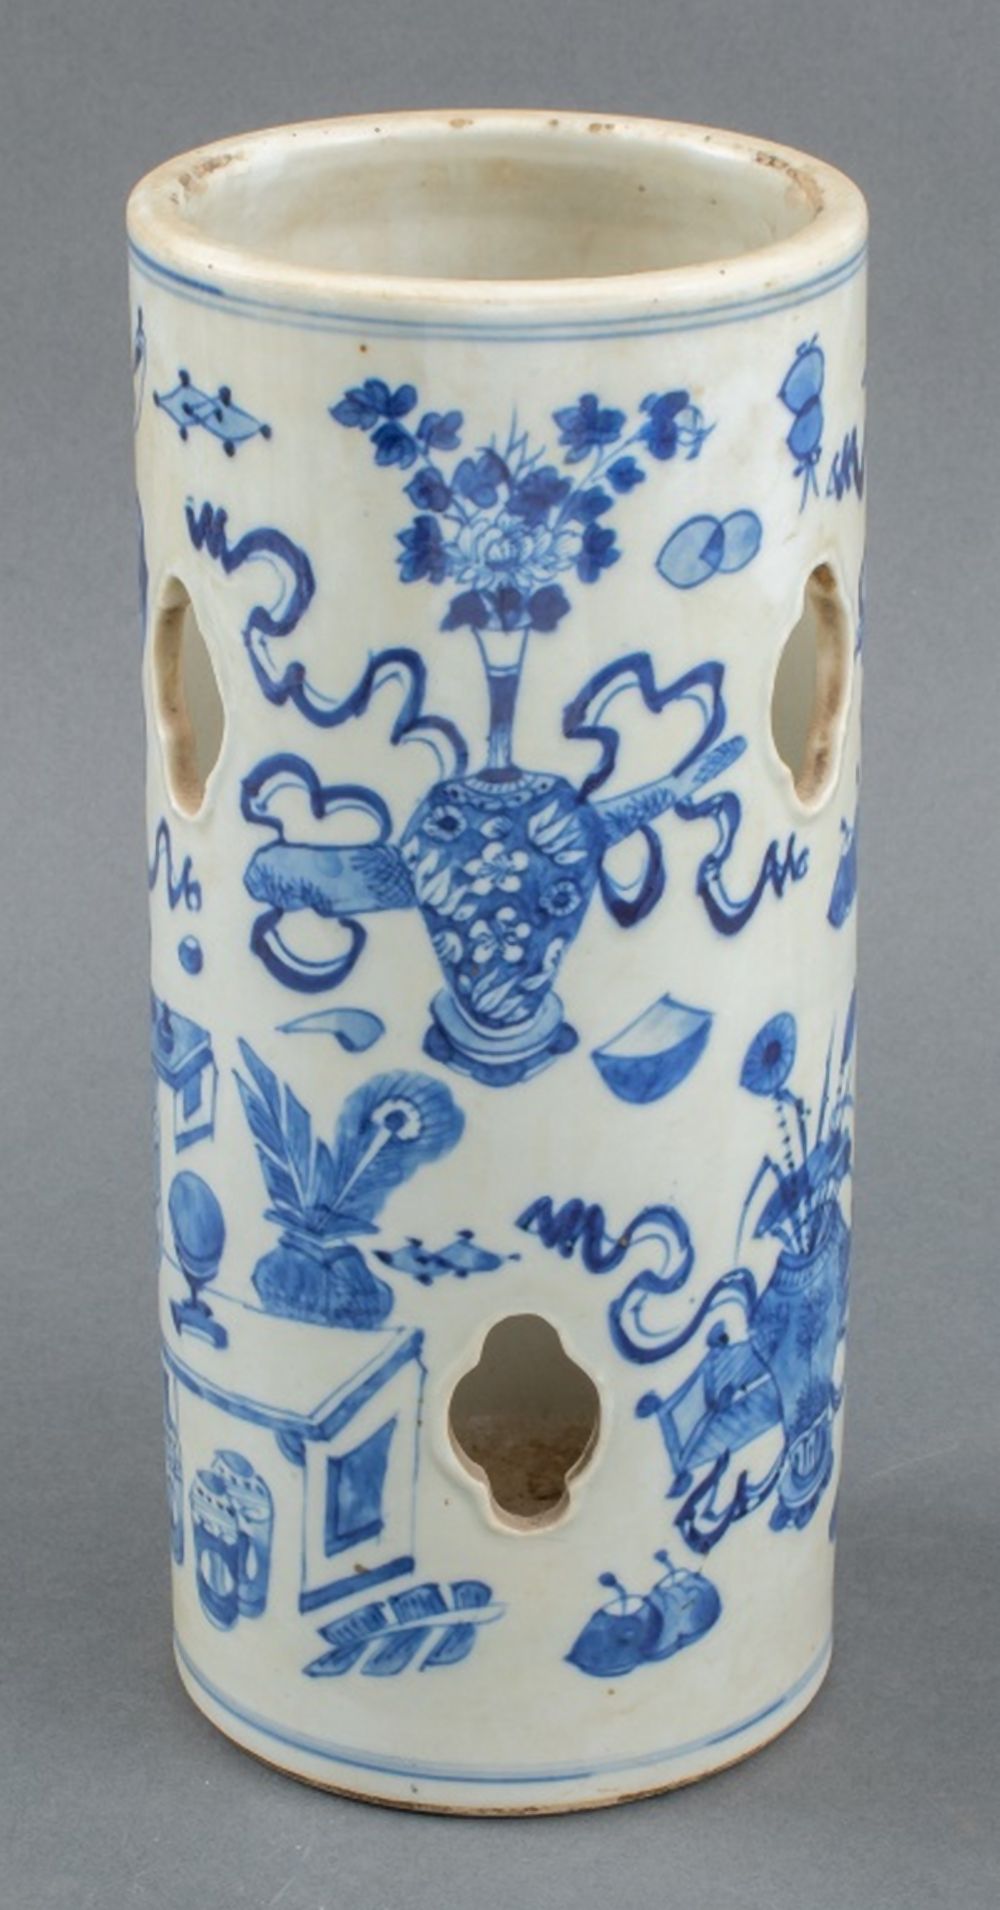 ANTIQUE CHINESE BLUE & WHITE PORCELAIN